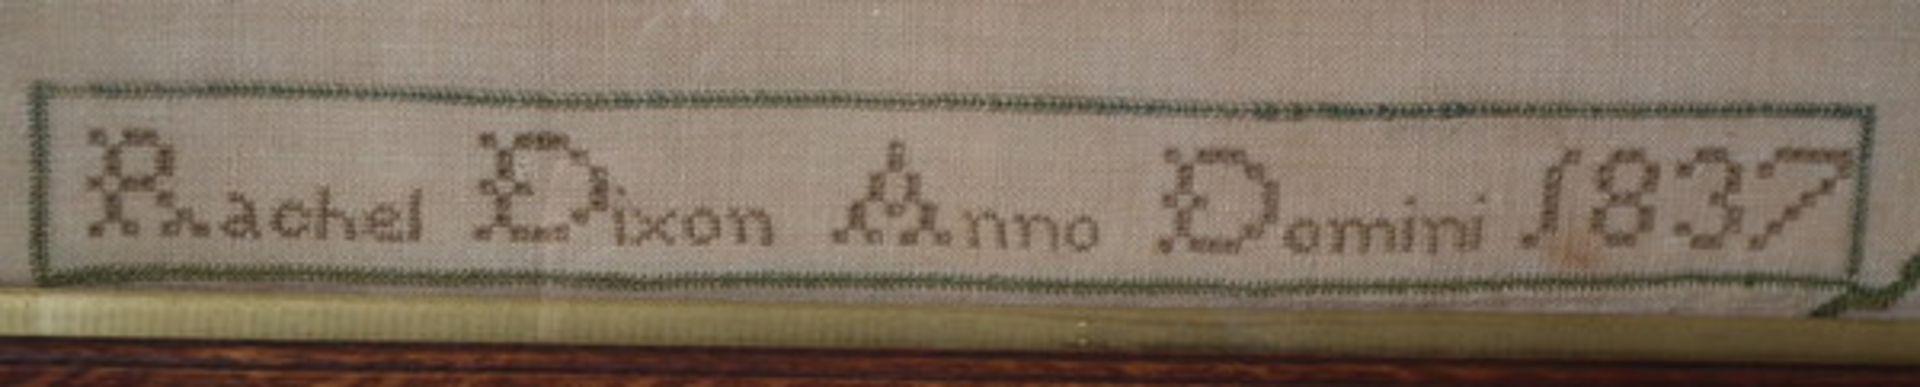 Needlework Map Sampler dated 1837 by Rachel Dixon FREE UK DELIVERY - Image 5 of 23